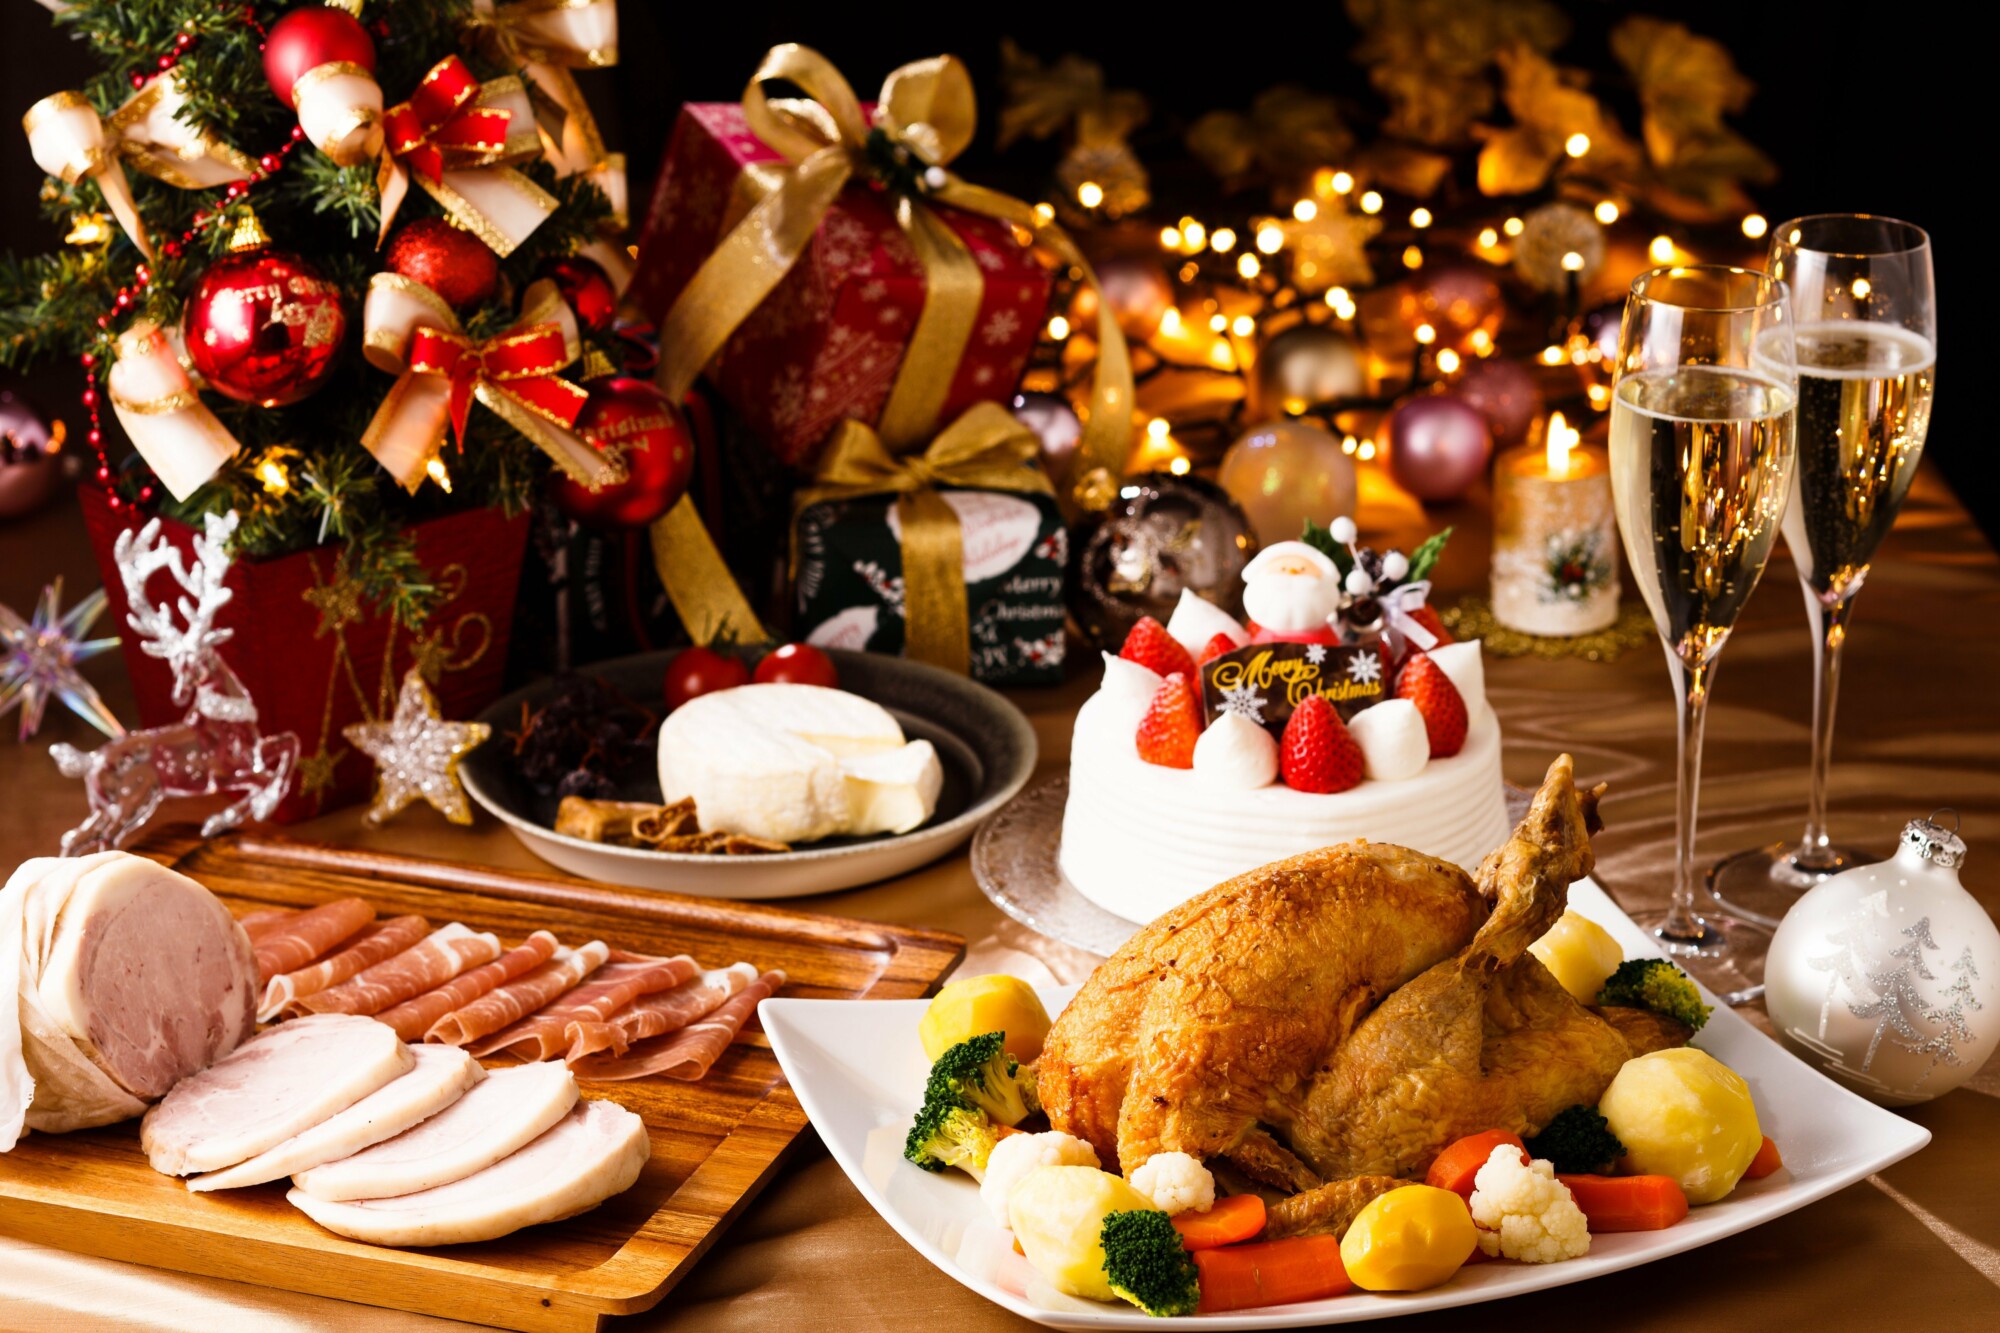 What farm produce will laden Christmas dinning tables? 